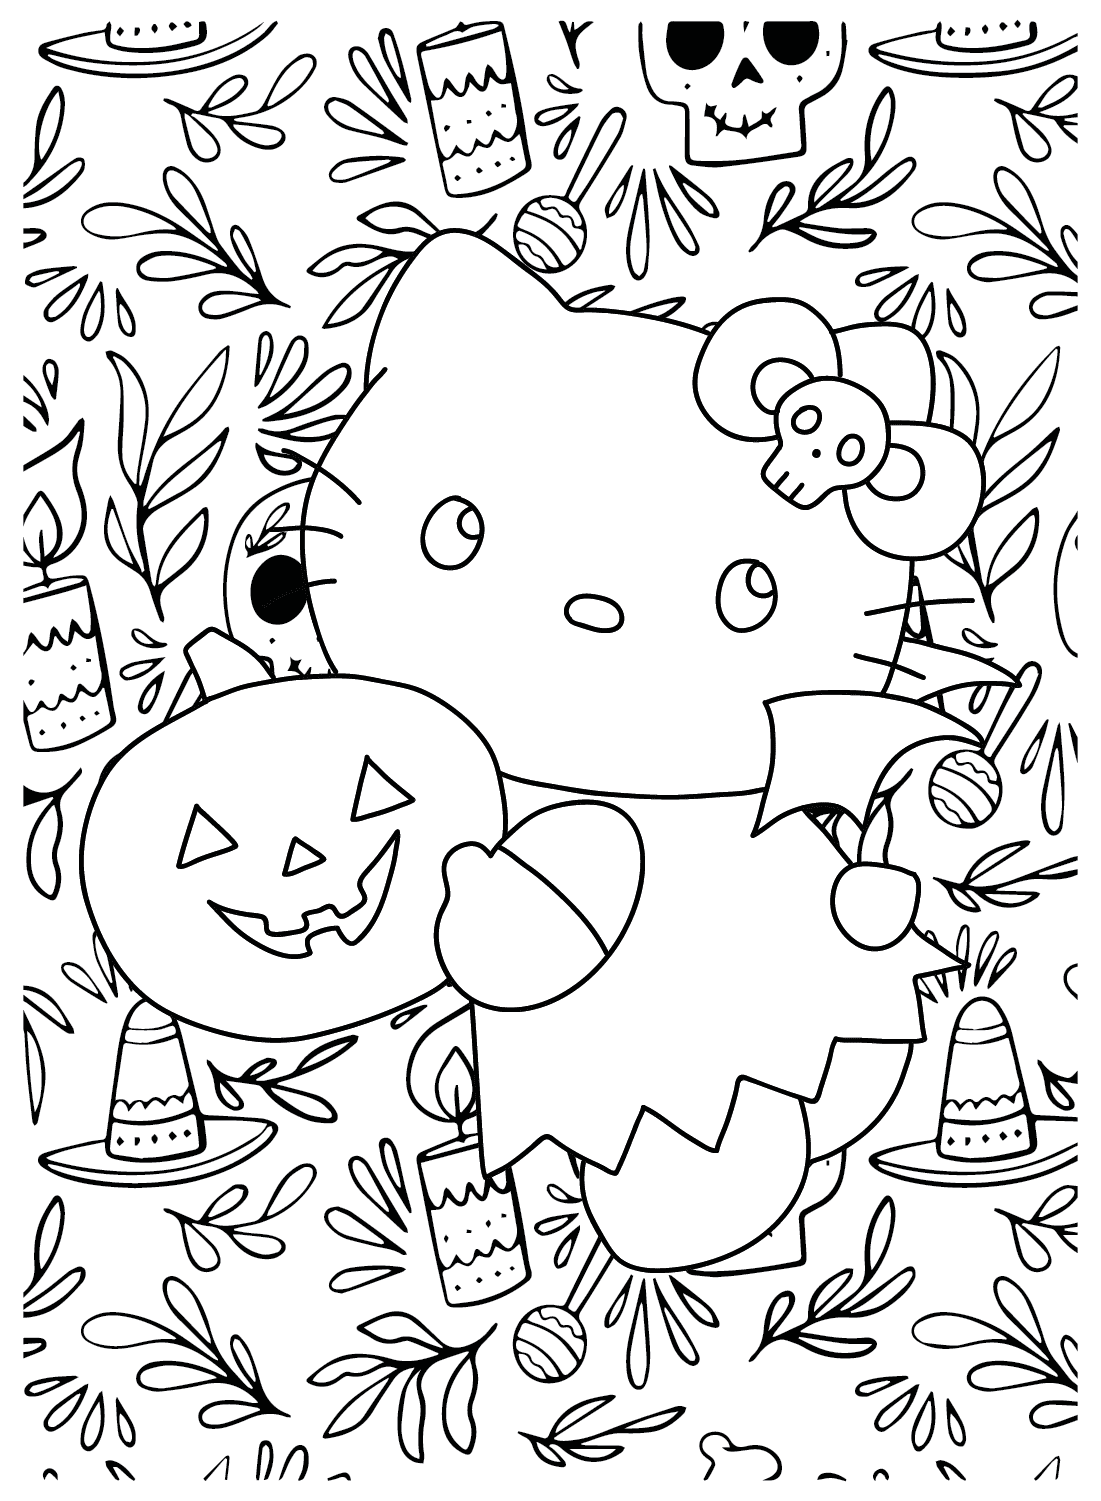 Coloring Pages of Hello Kitty Halloween from Halloween Hello Kitty